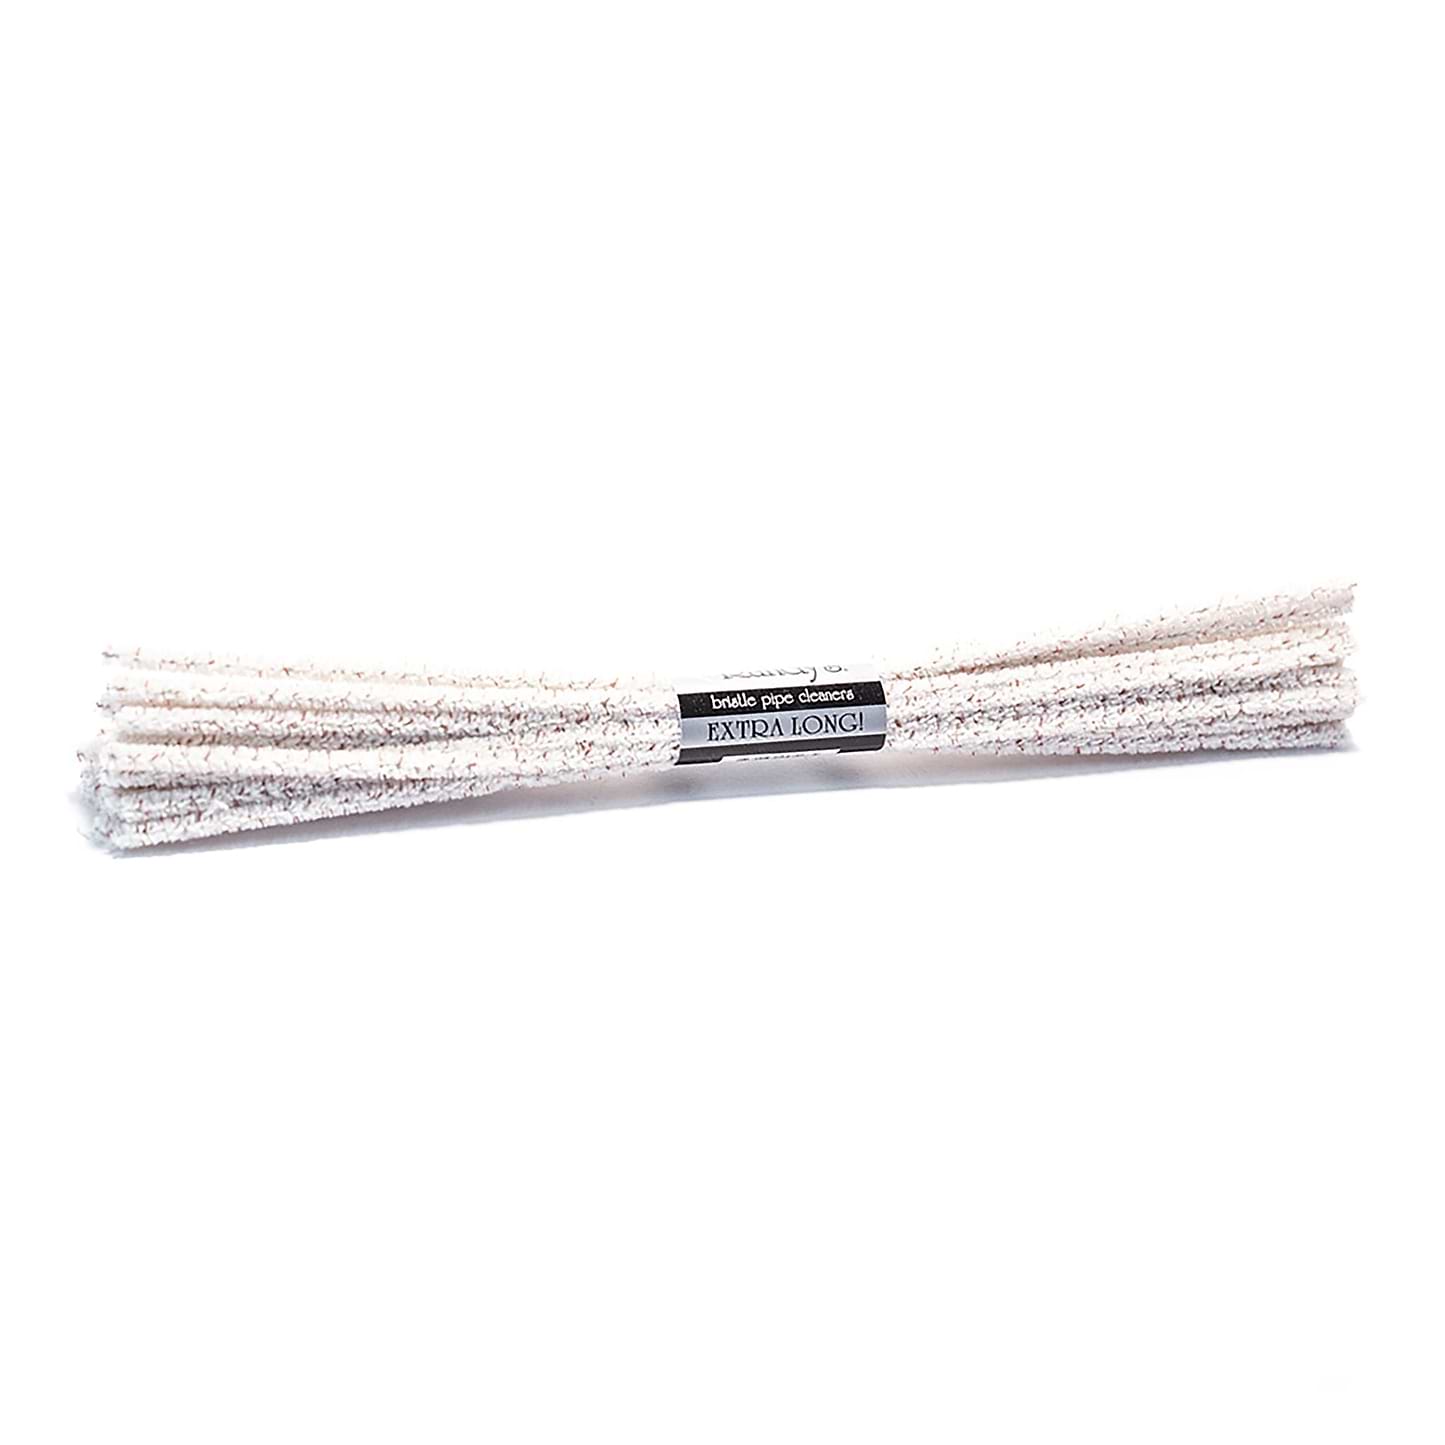 Randys Extra Long Pipe Cleaners - 2 Pack Bristle